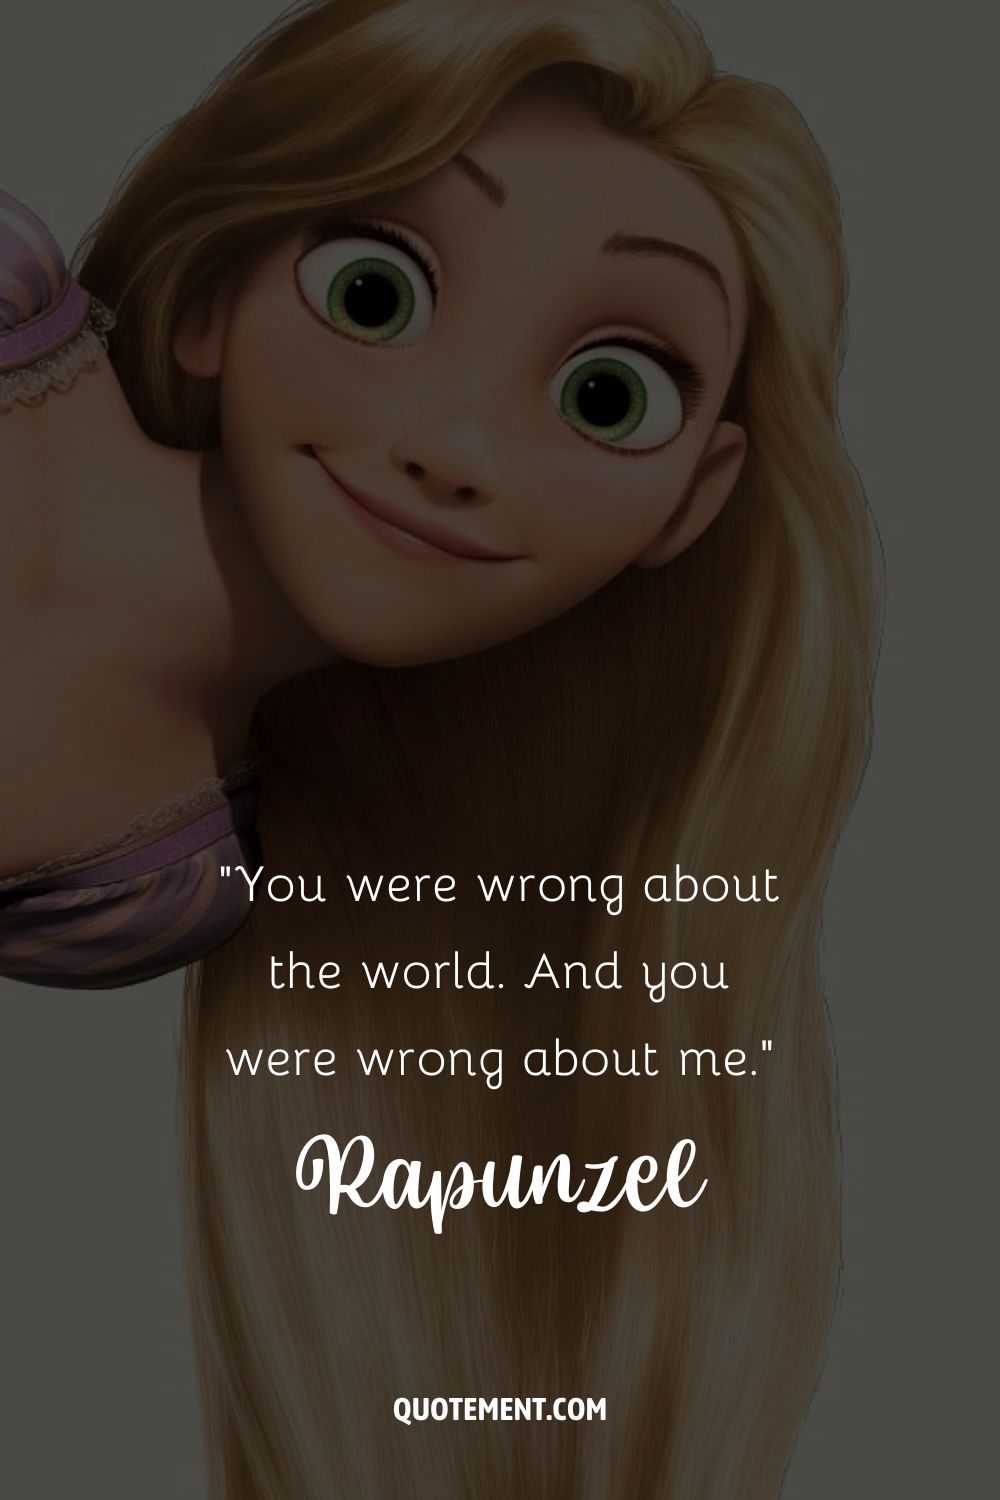 blonde cartoon character with green eyes representing tangled quote